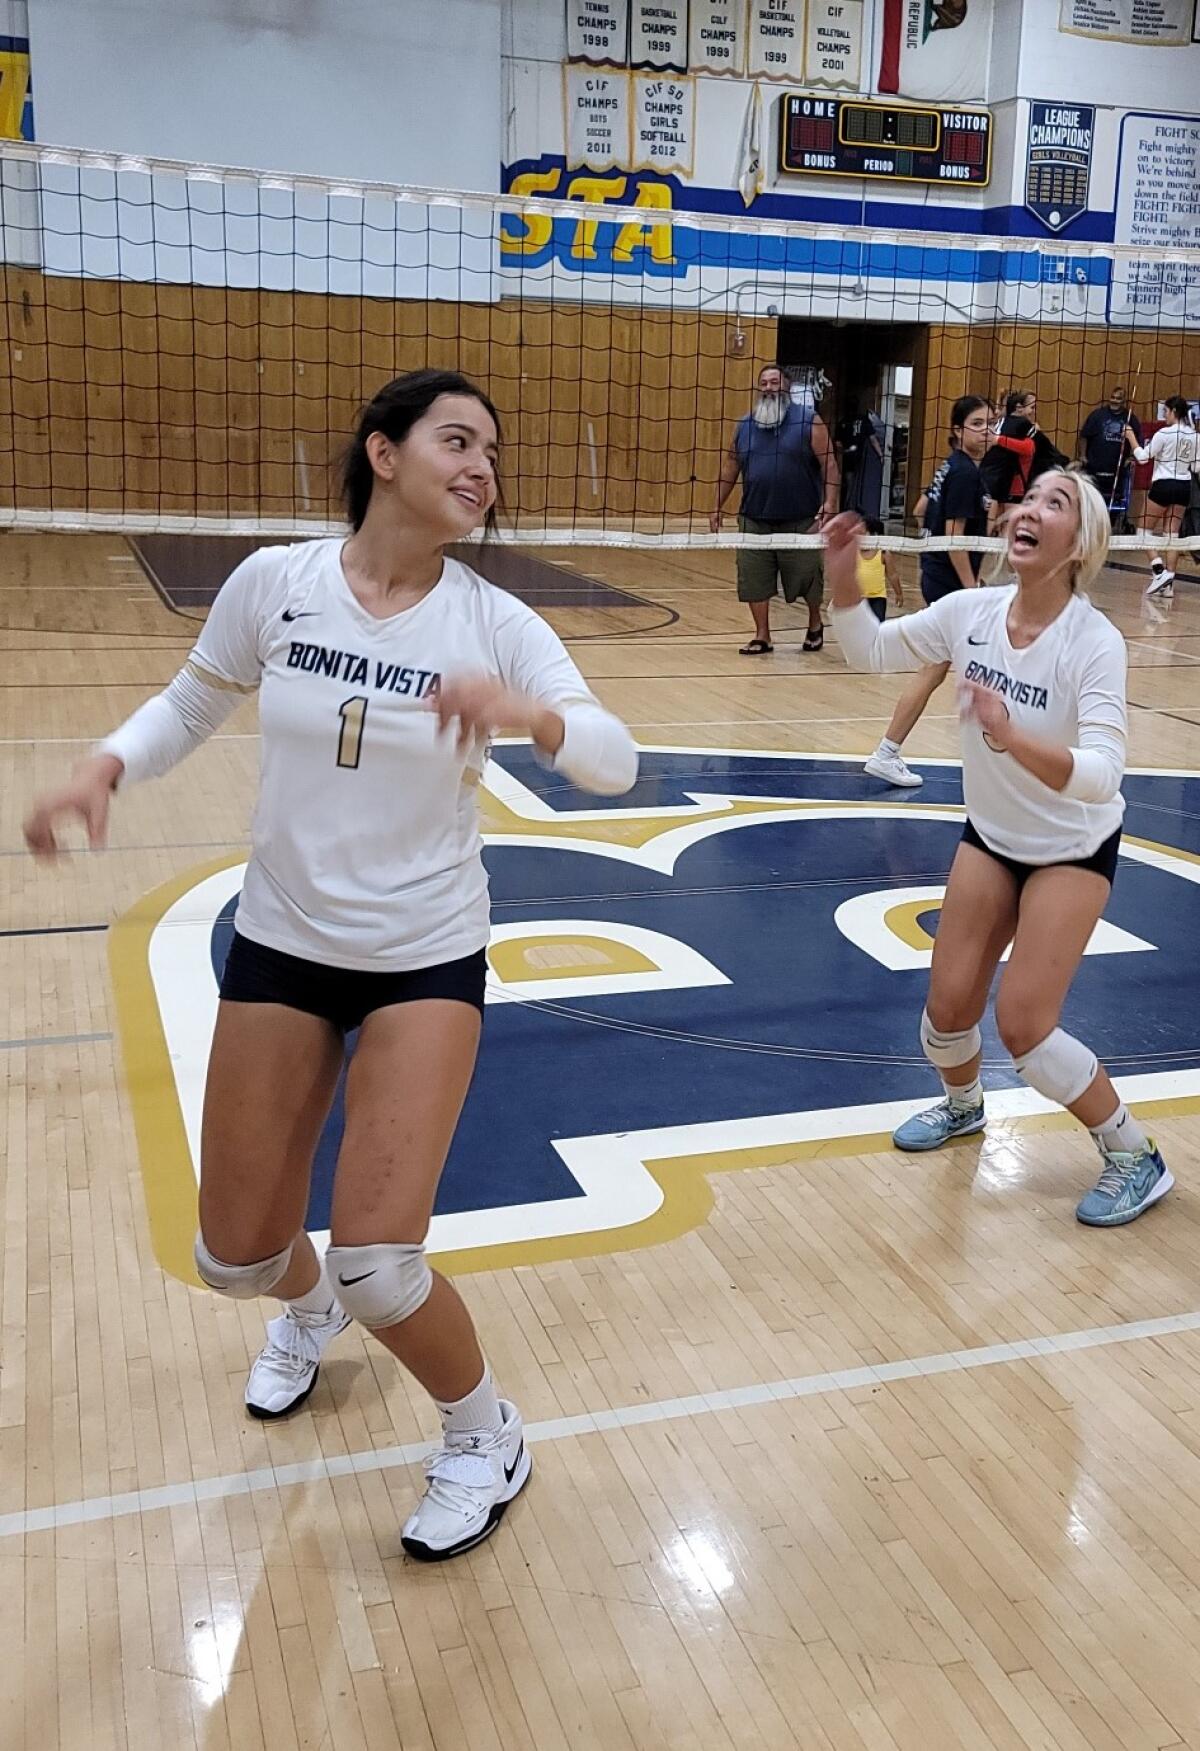 Alina Inzunza (left) and Jaiden Mojica, who is waiting for the ball to come down.